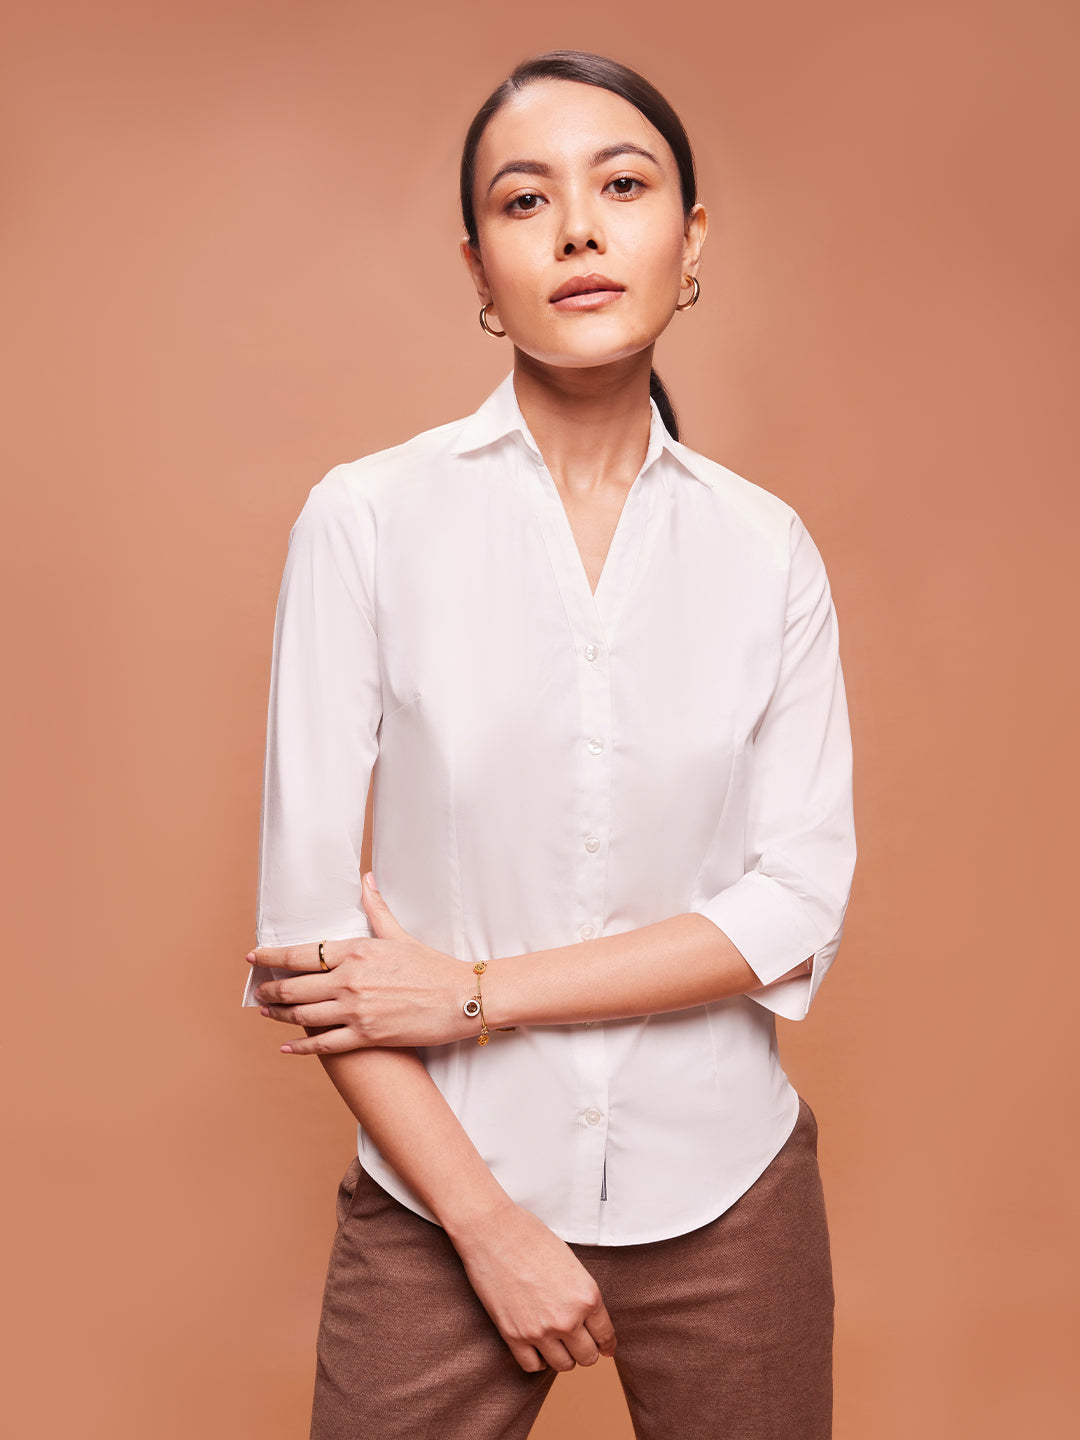 Bombay High Women's Bright White Y-Placket 3/4th Sleeves Shirt